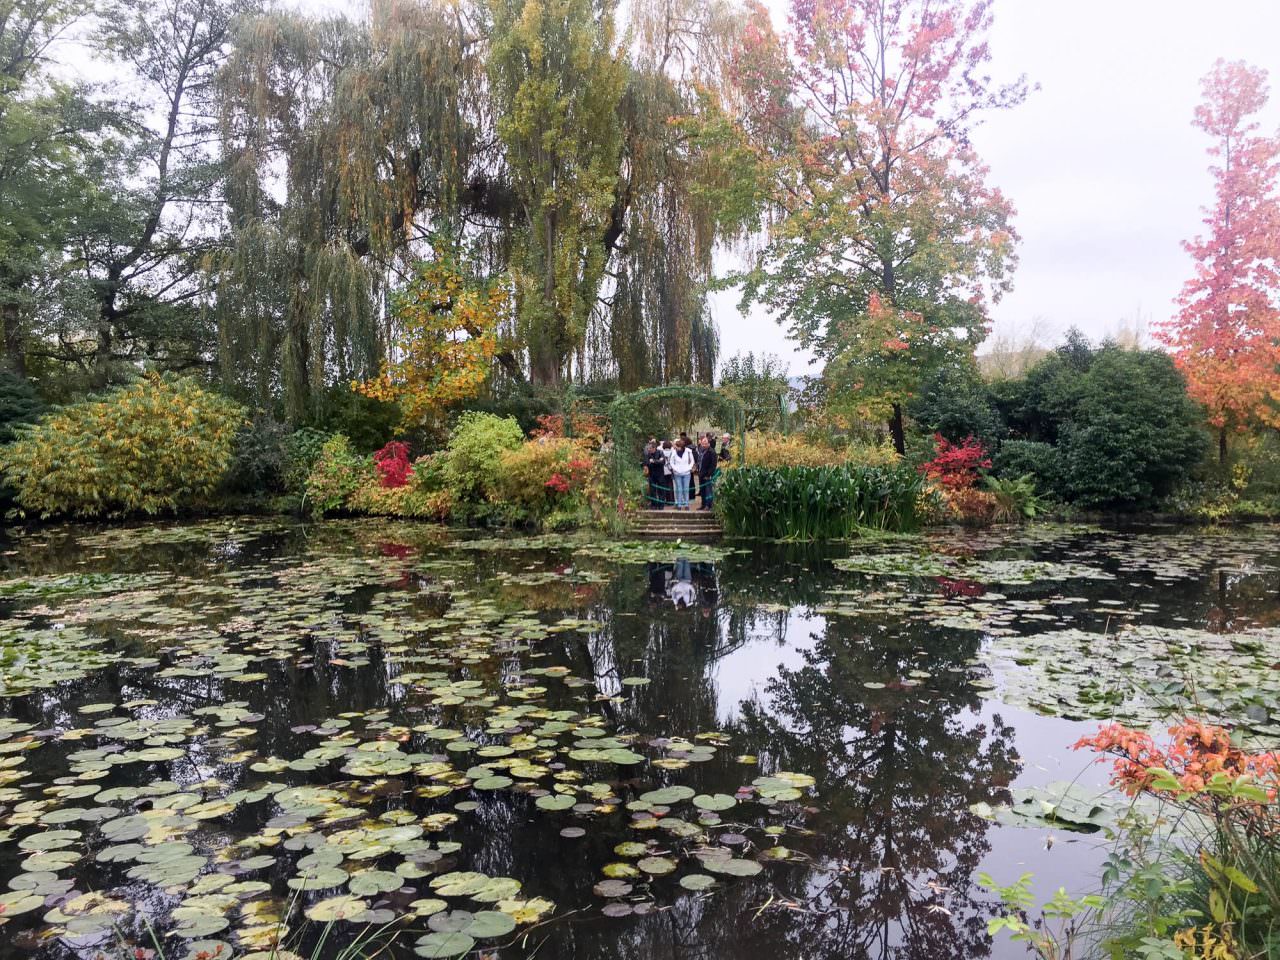 At Monet's Gardens. © 2016 Ralph Grizzle